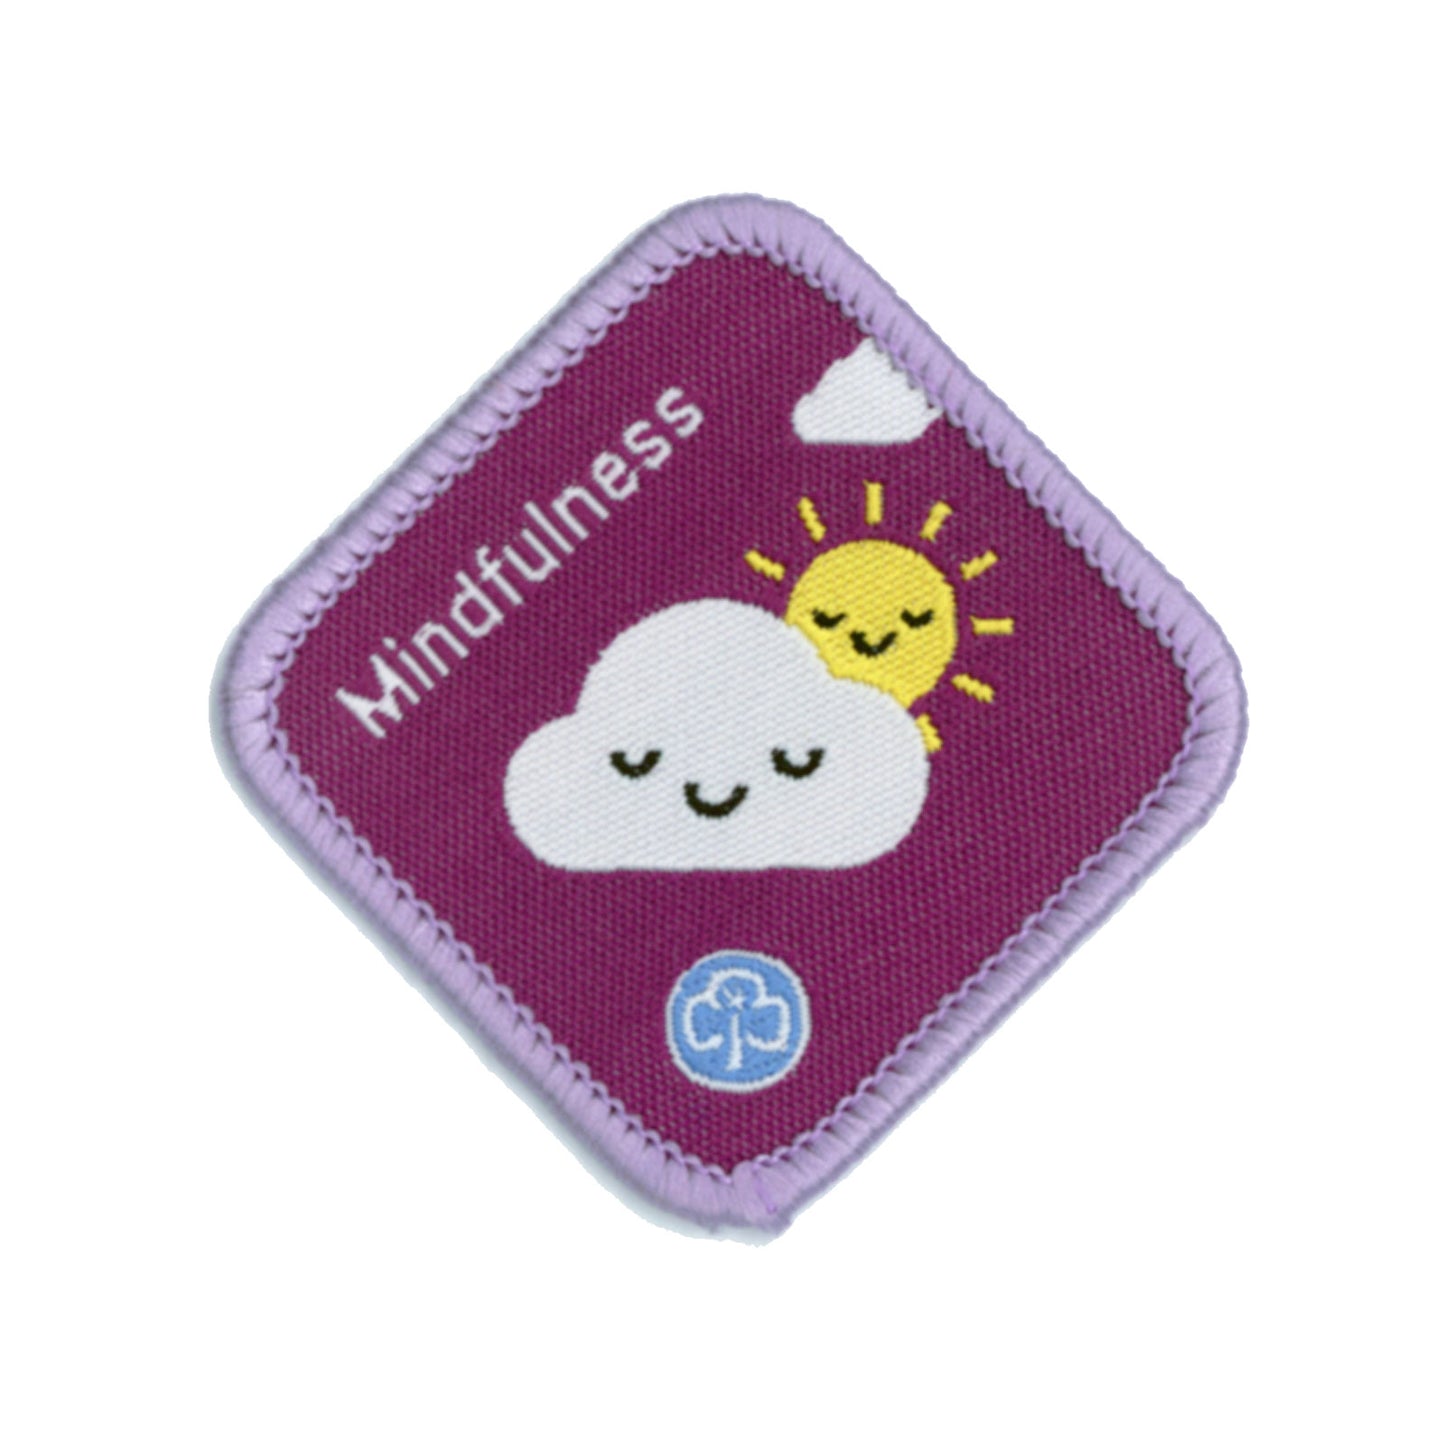 Brownies Mindfulness Woven Badge